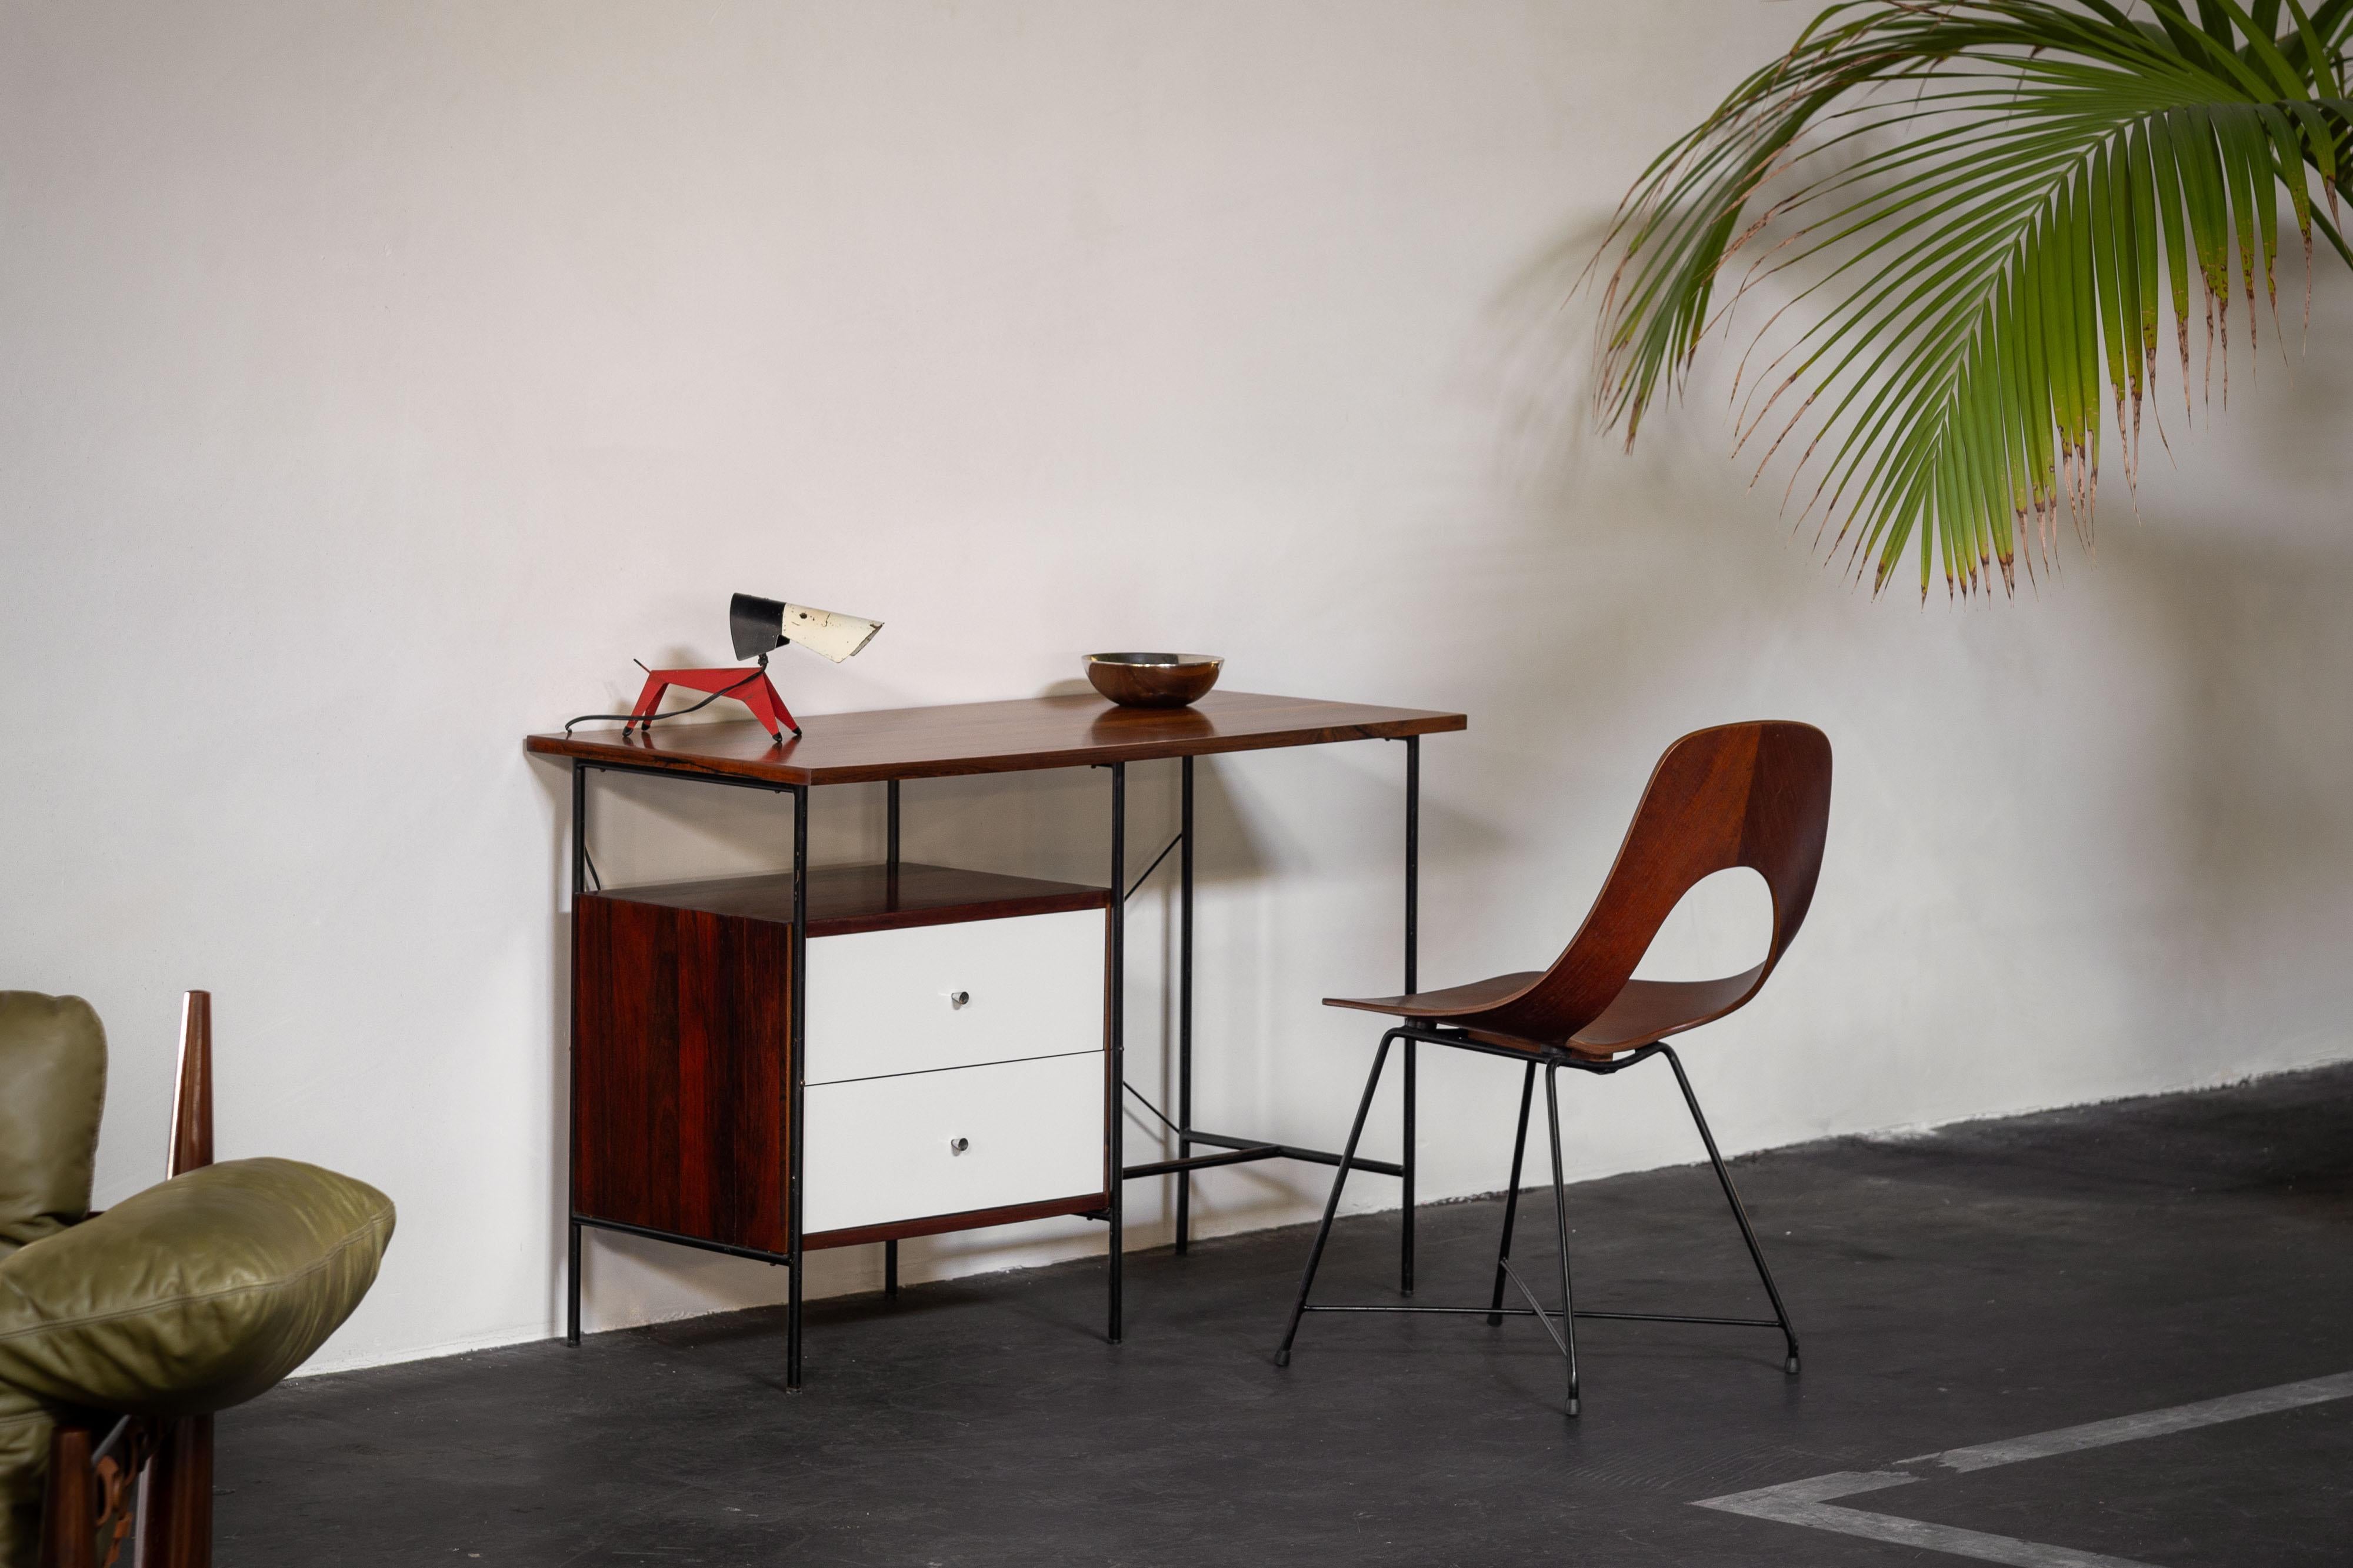 Very nice minimalistic small writing desk designed by Geraldo de Barros and manufactured by Unilabor, Brazil 1956. The desk is made up of three main parts. The black iron frame, rosewood finished top and the drawer cabinet. The drawer fronts have